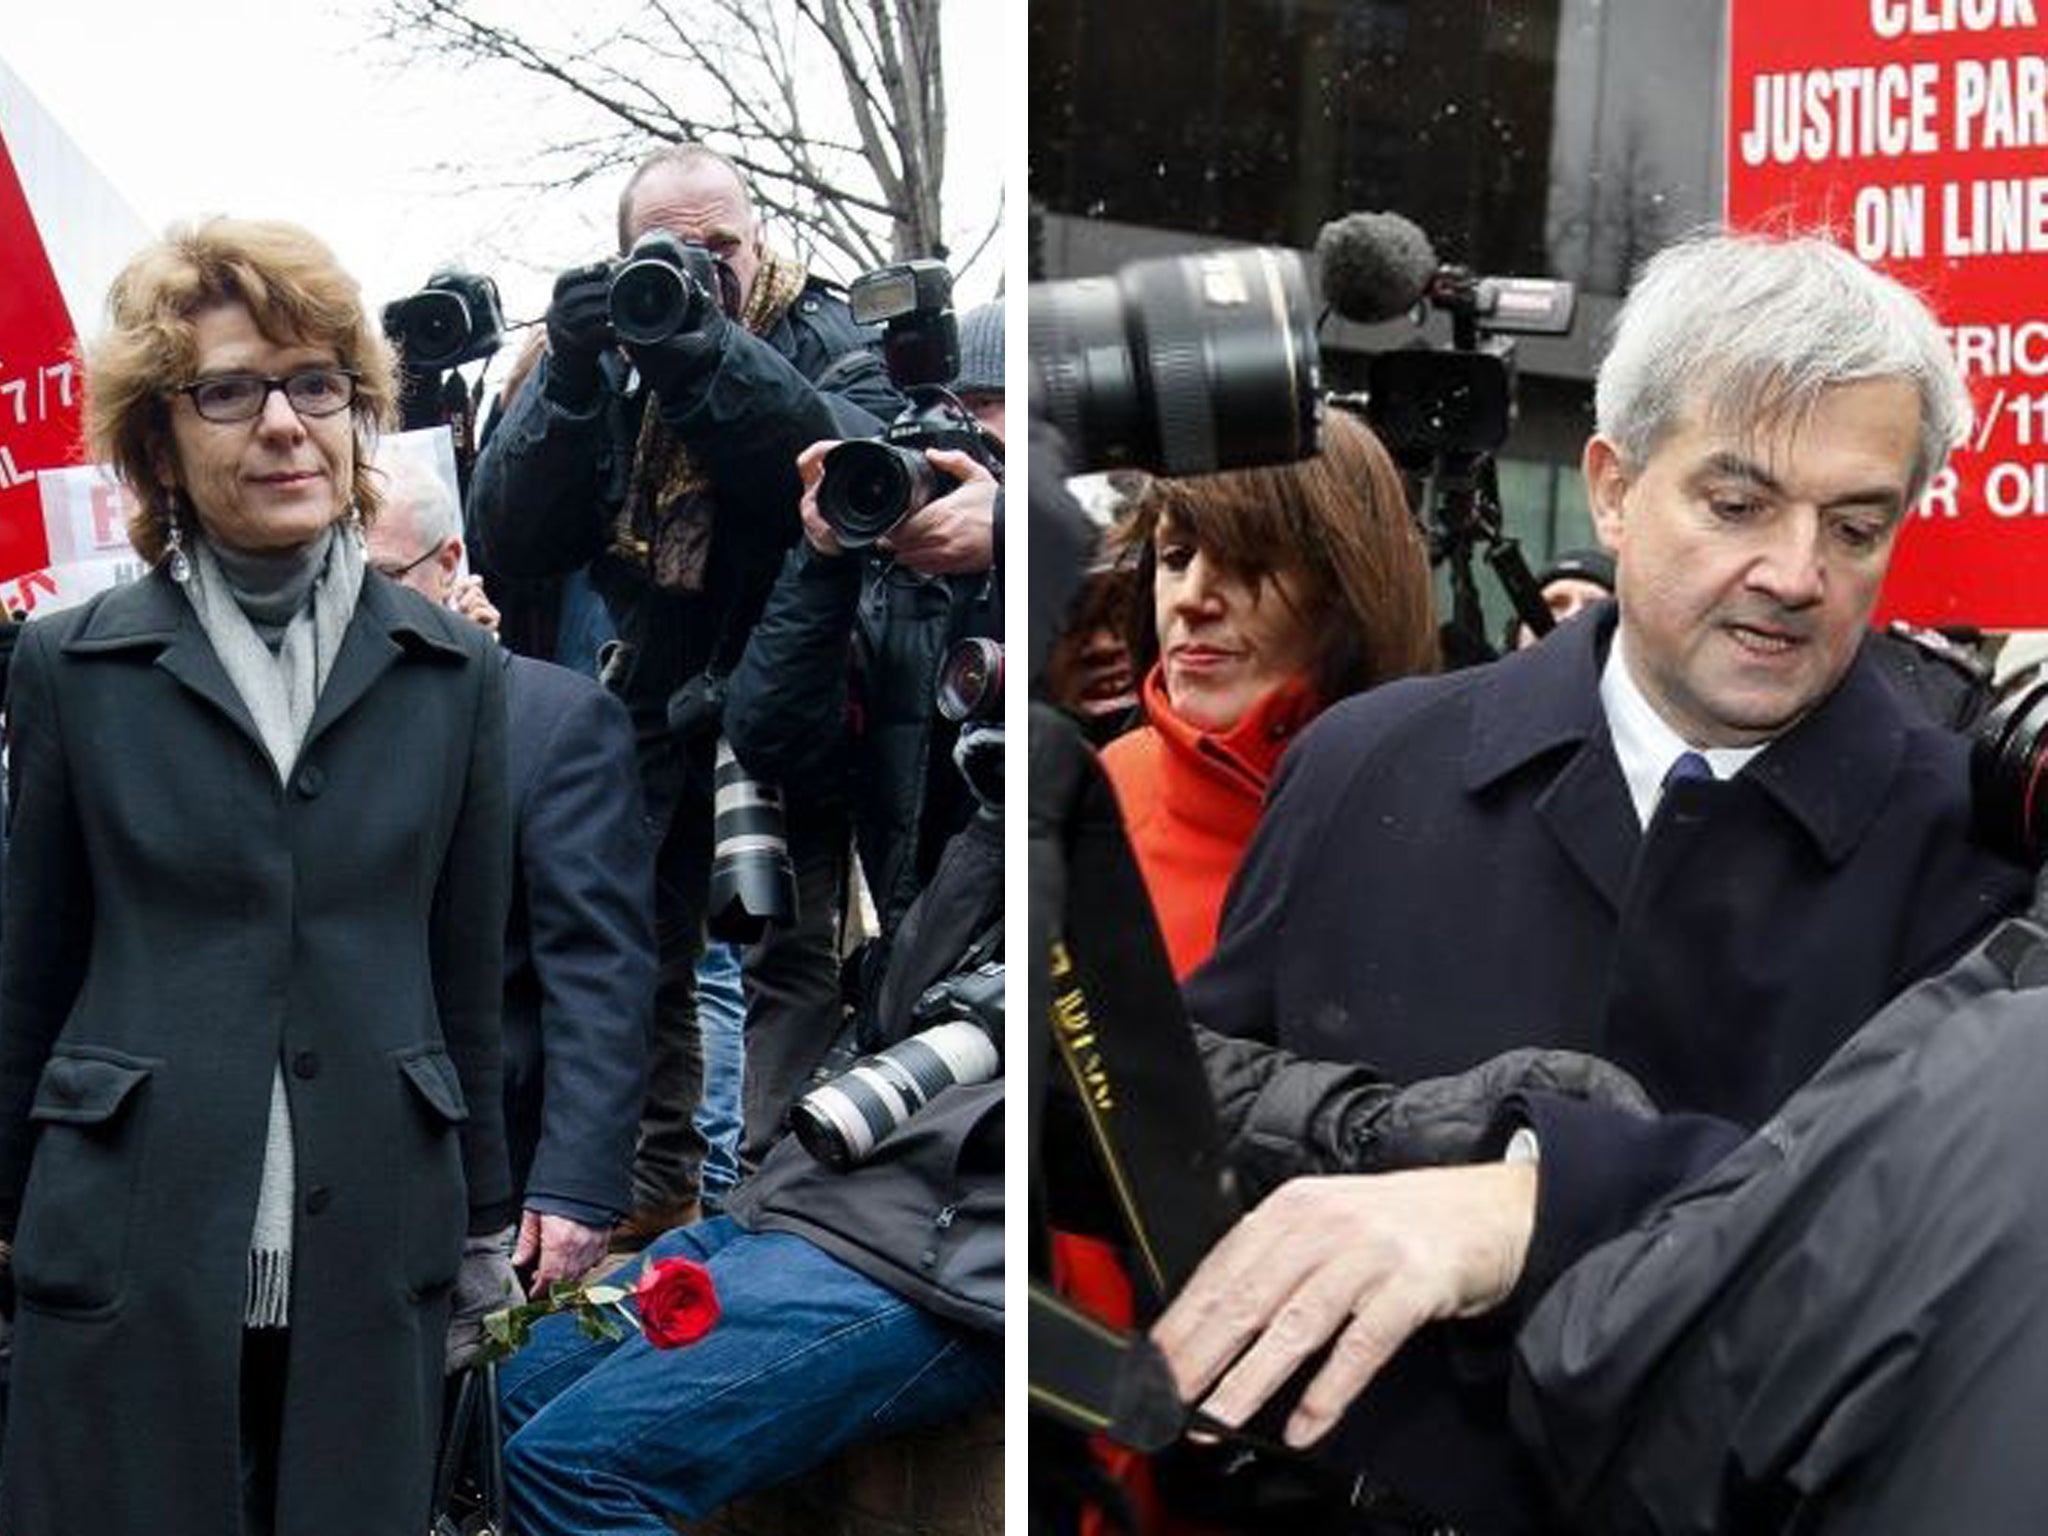 Vicky Pryce and Chris Huhne arrive at Southwark Crown Court for sentencing